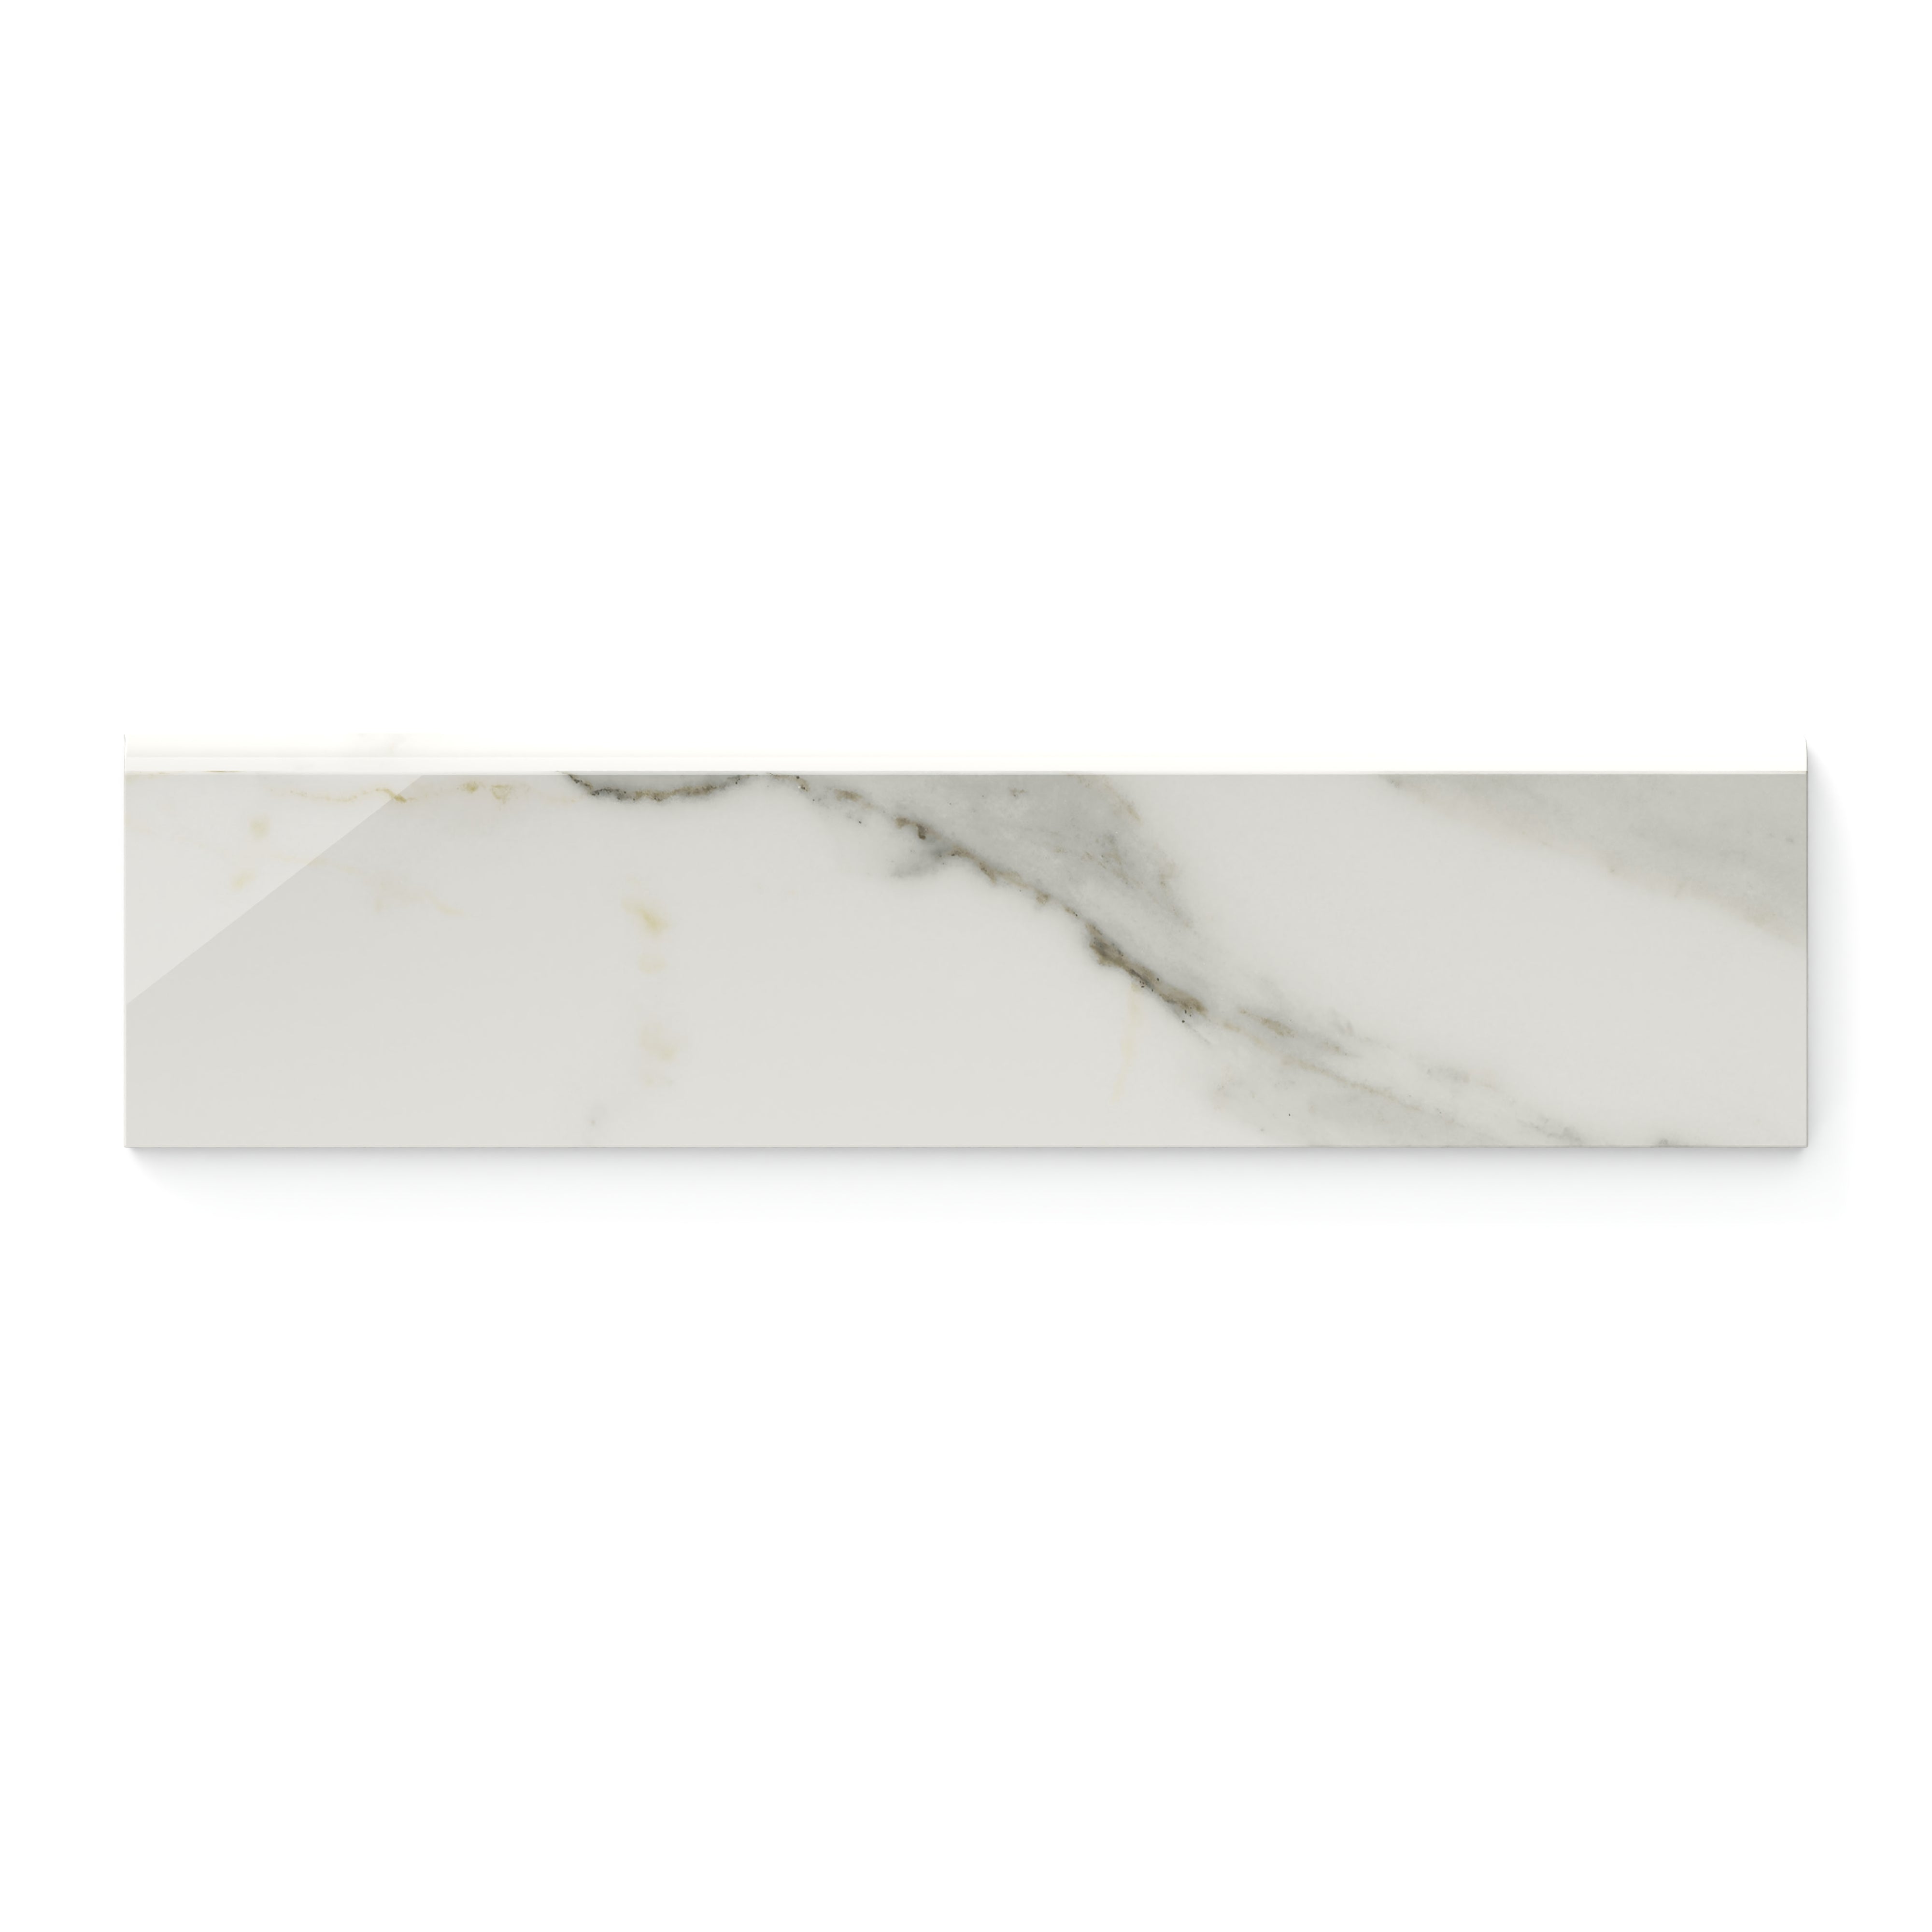 Aniston 3x12 Polished Porcelain Bullnose Tile in Calacatta Top